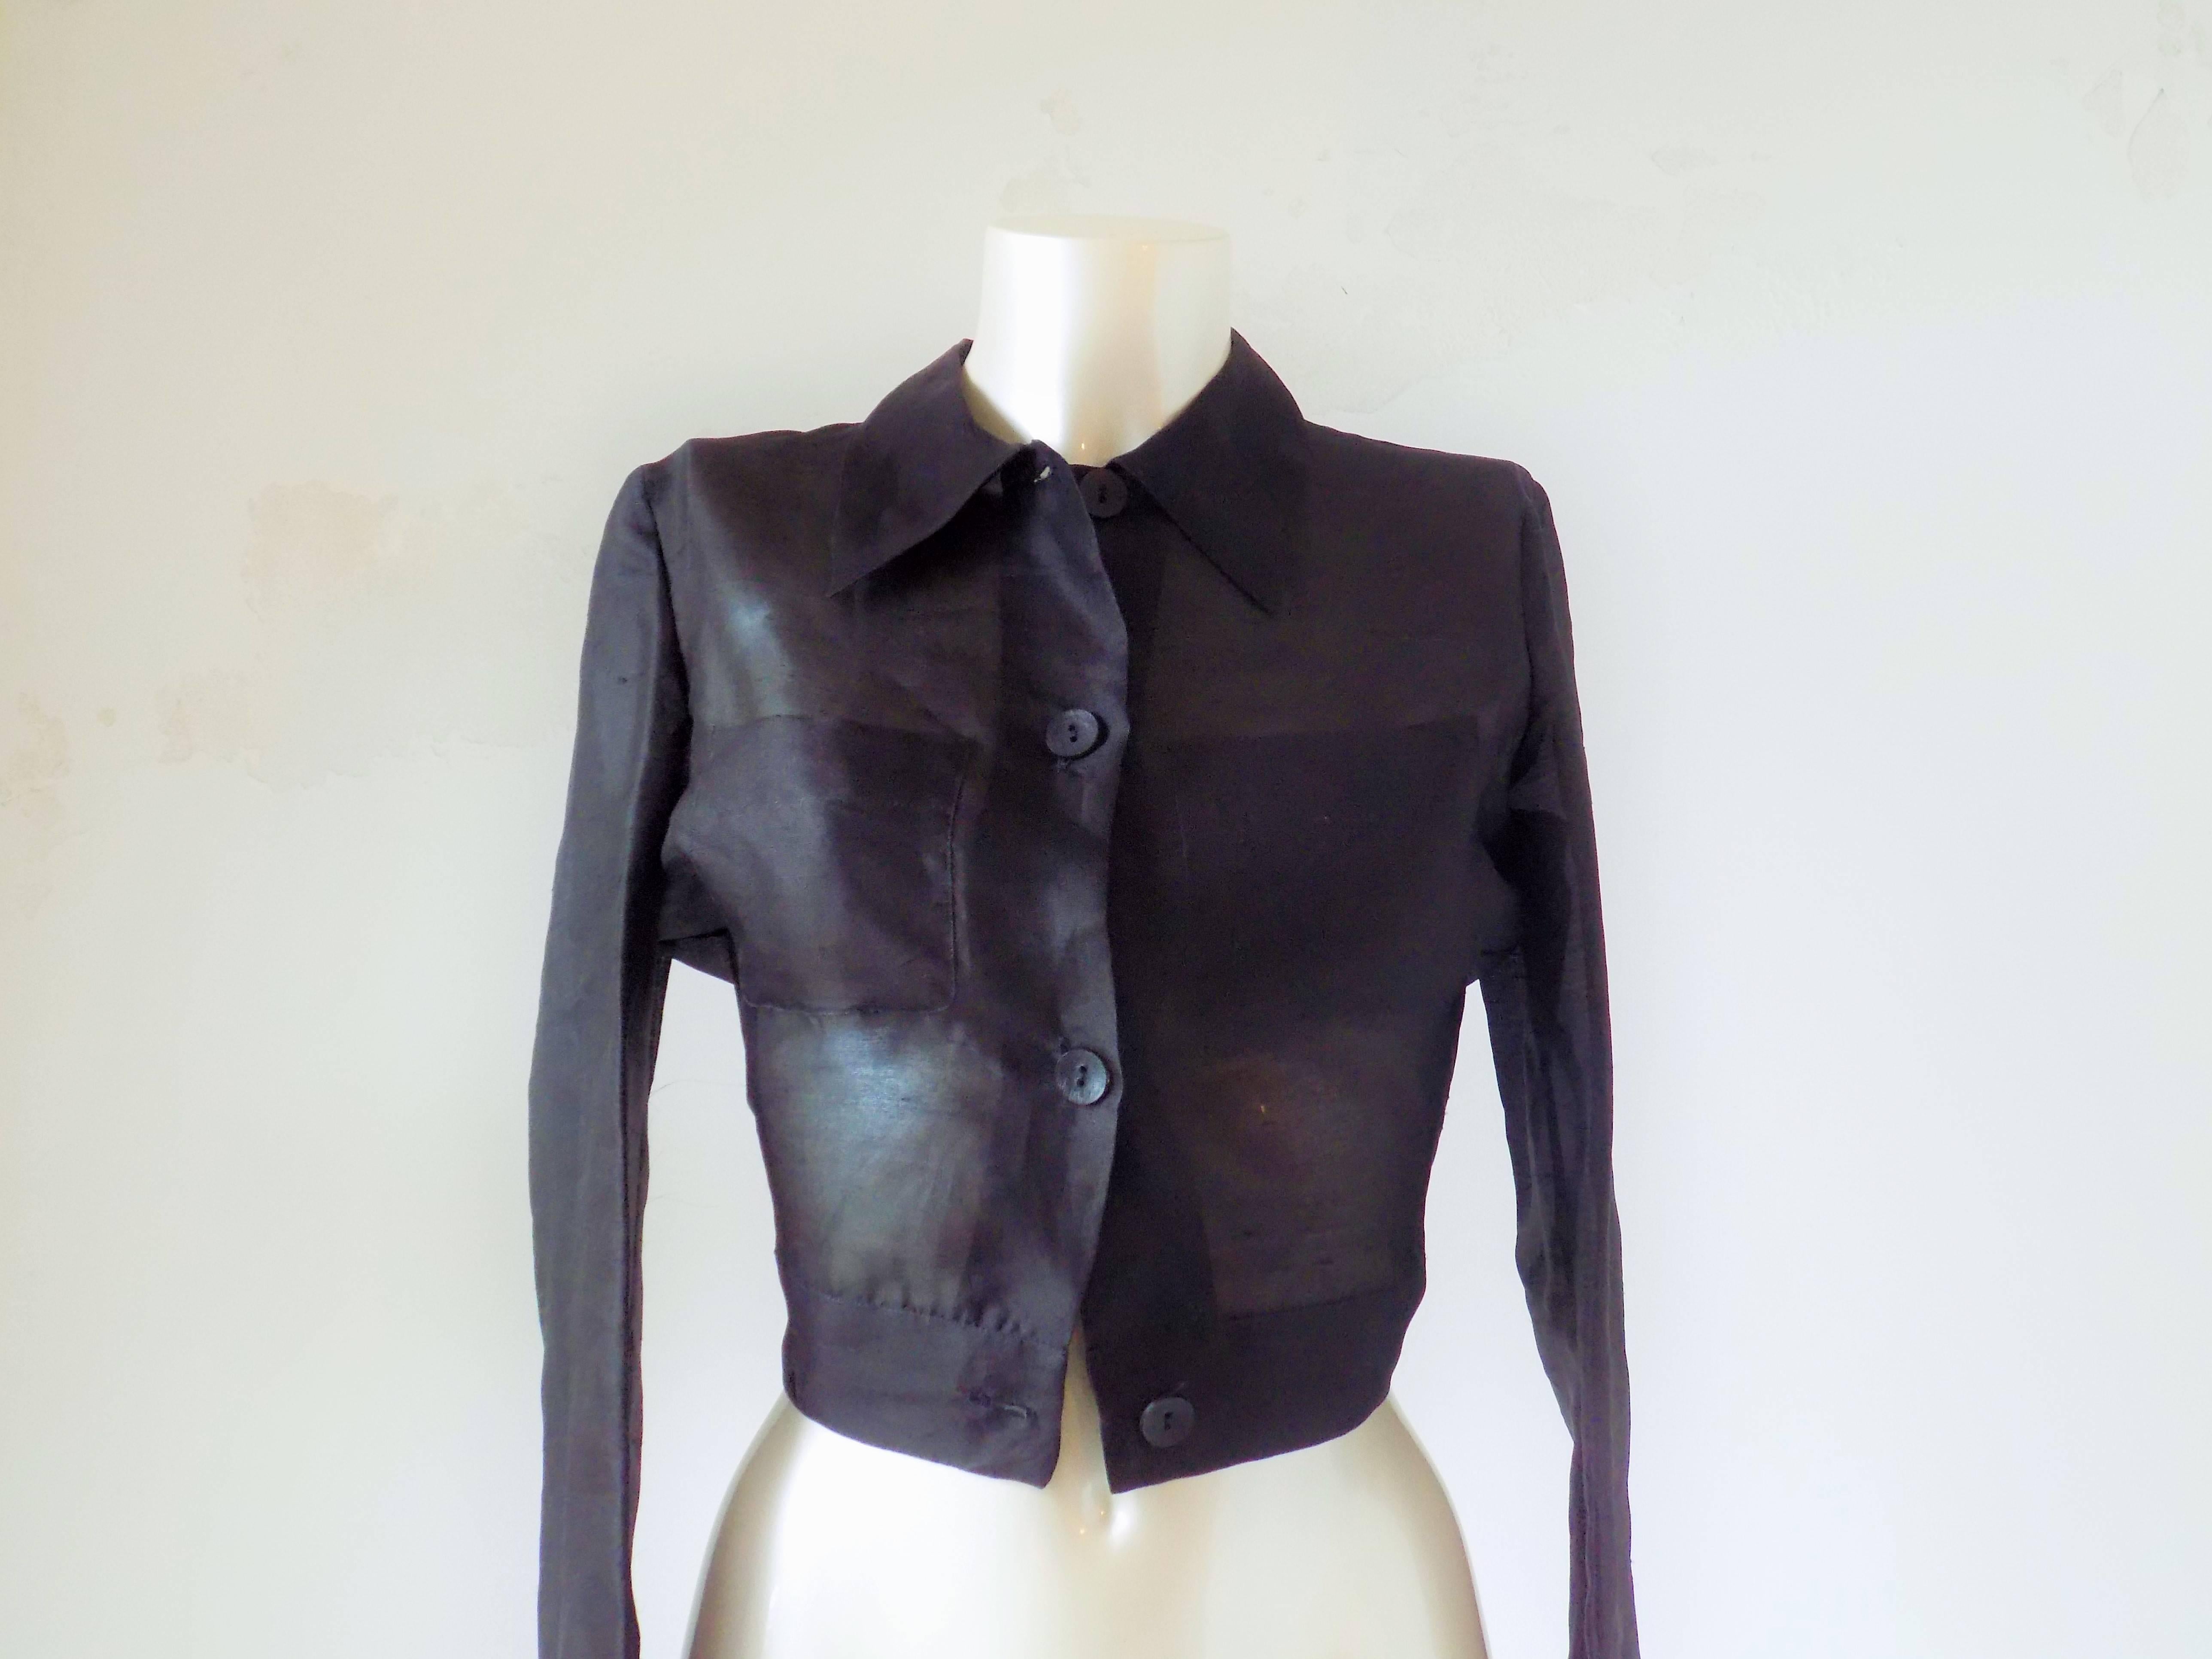 1980s Blumarine see through black shirt NWOT

Totally made in italy

Composition : 100 % Silk

Size: 40 italian size range